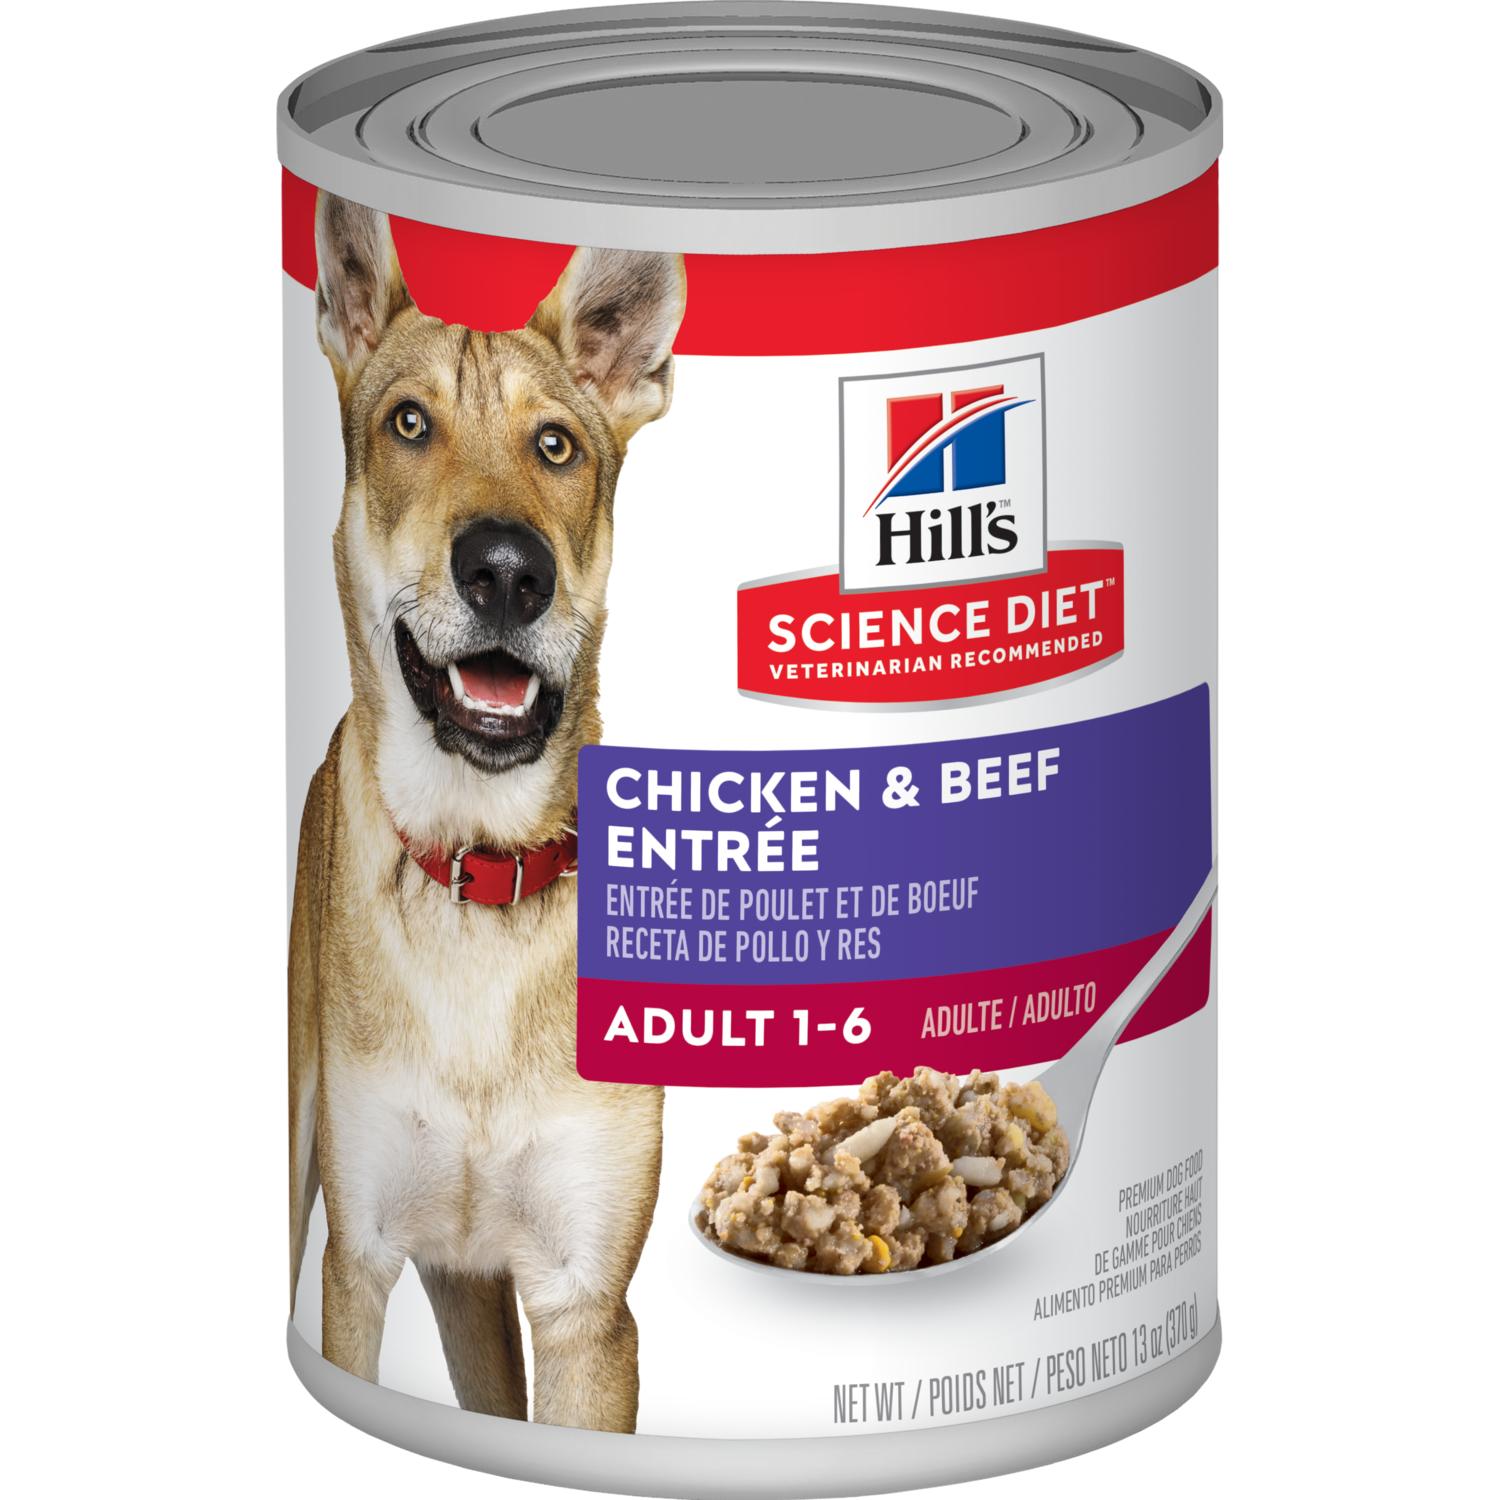 CHICK/BEEF DOG ADULT SD 13oz